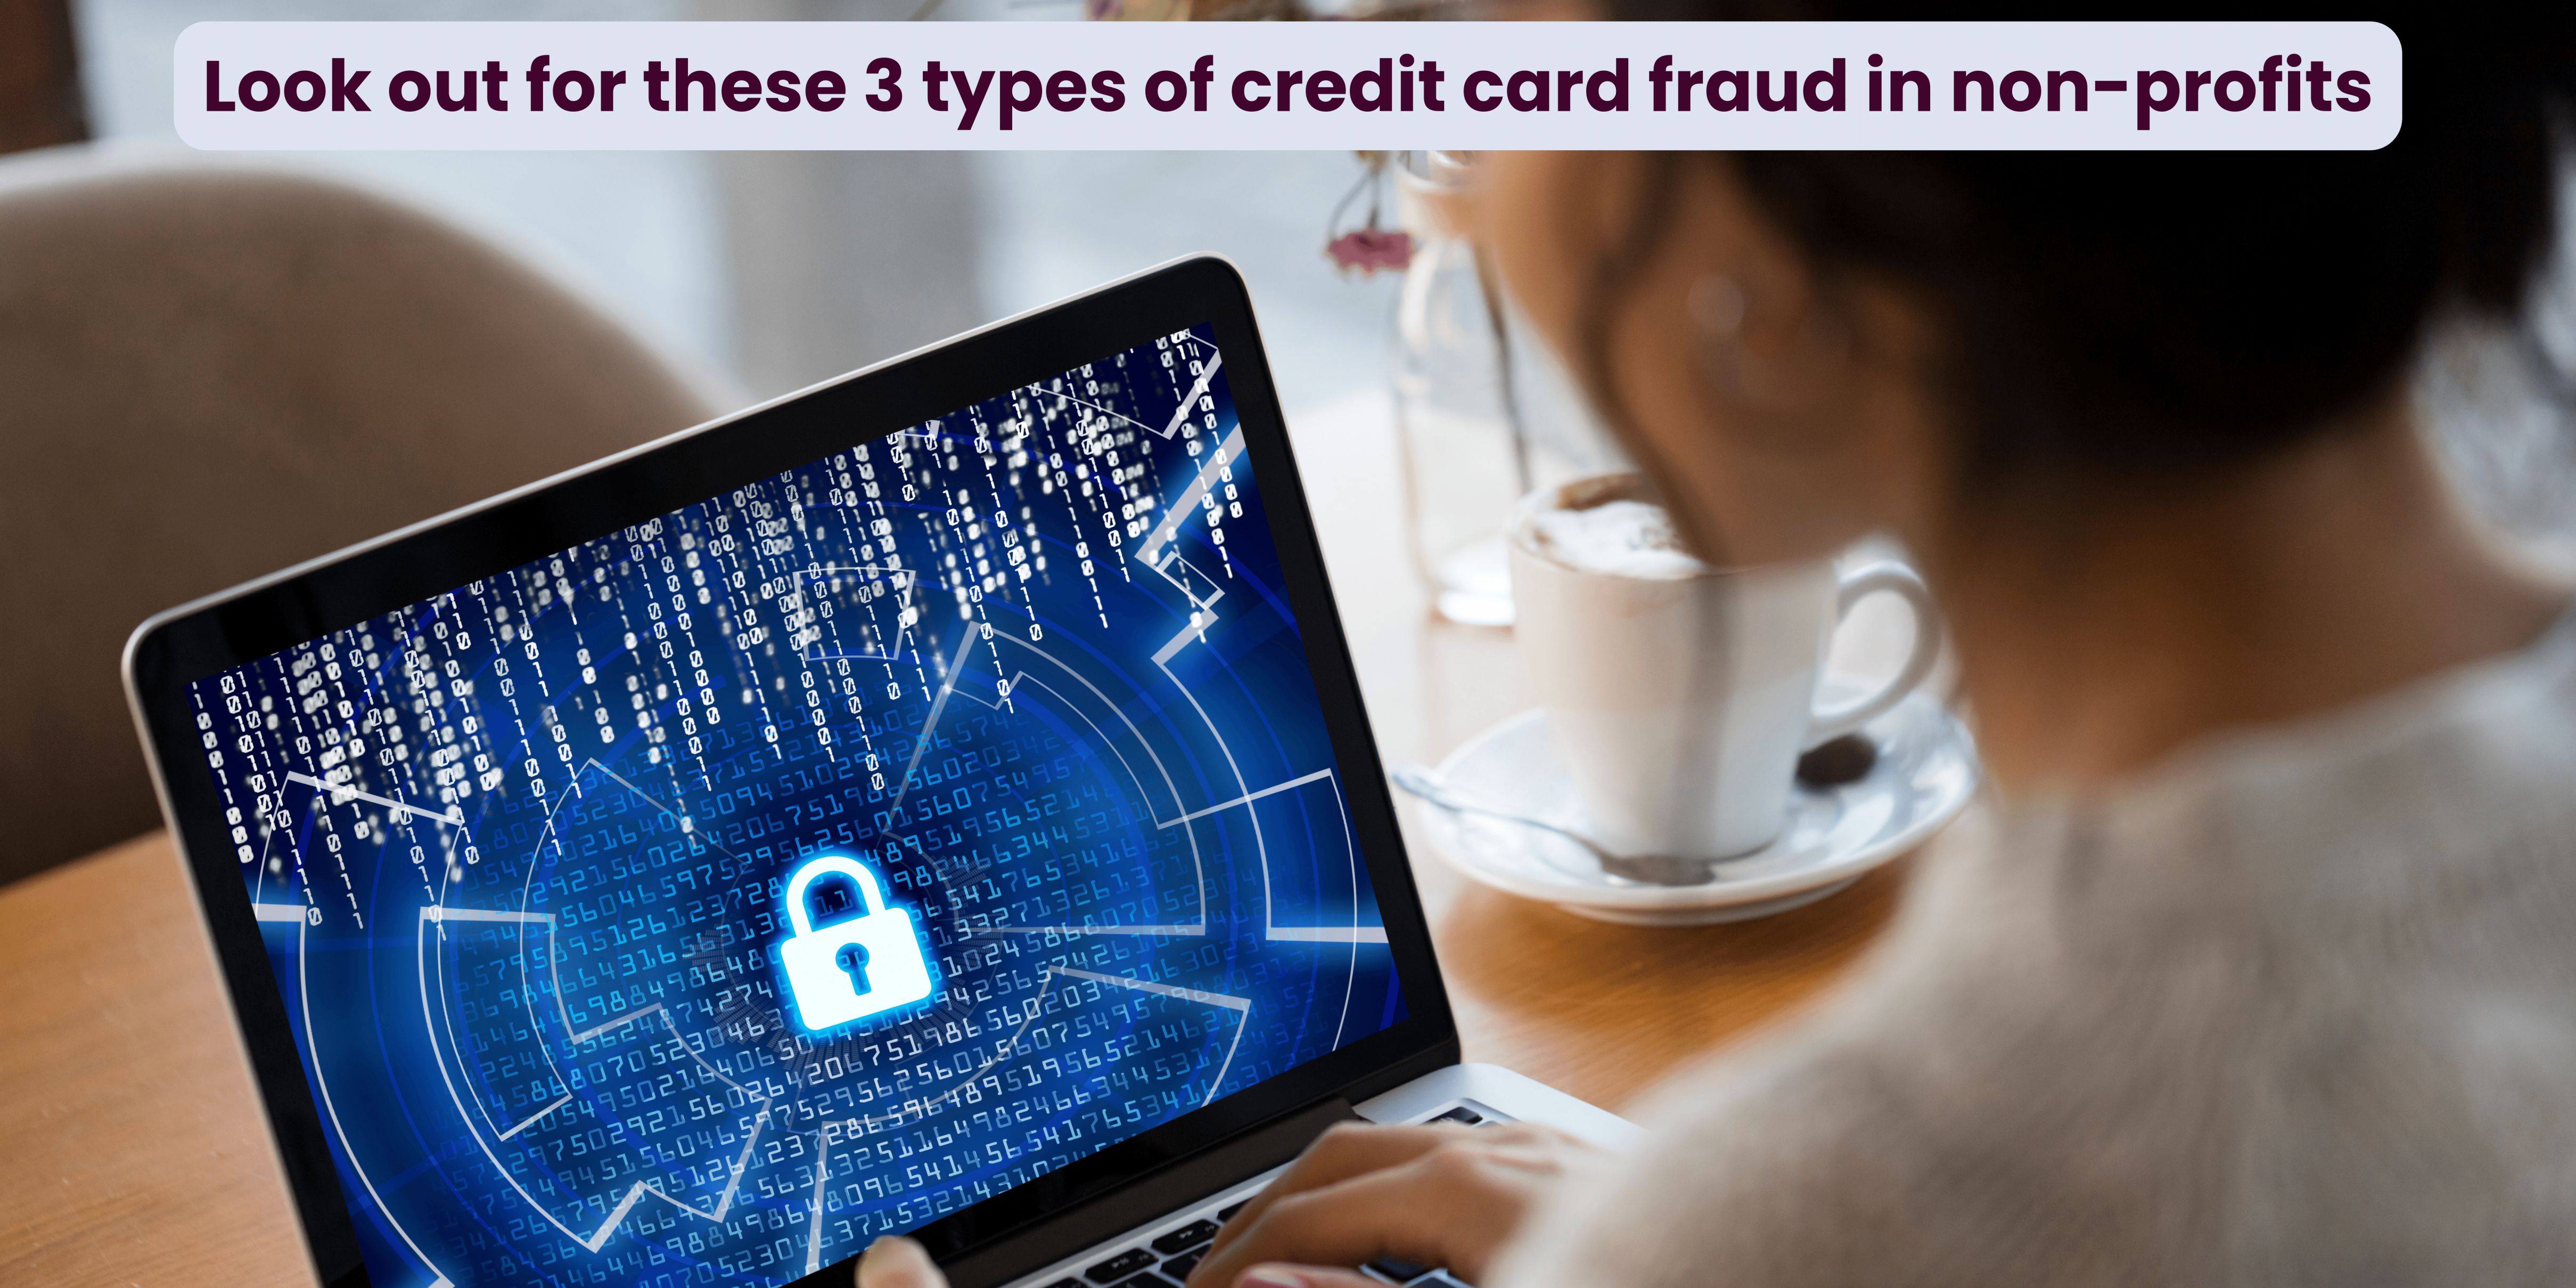 Look Out for these 3 types of credit card fraud in non-profits